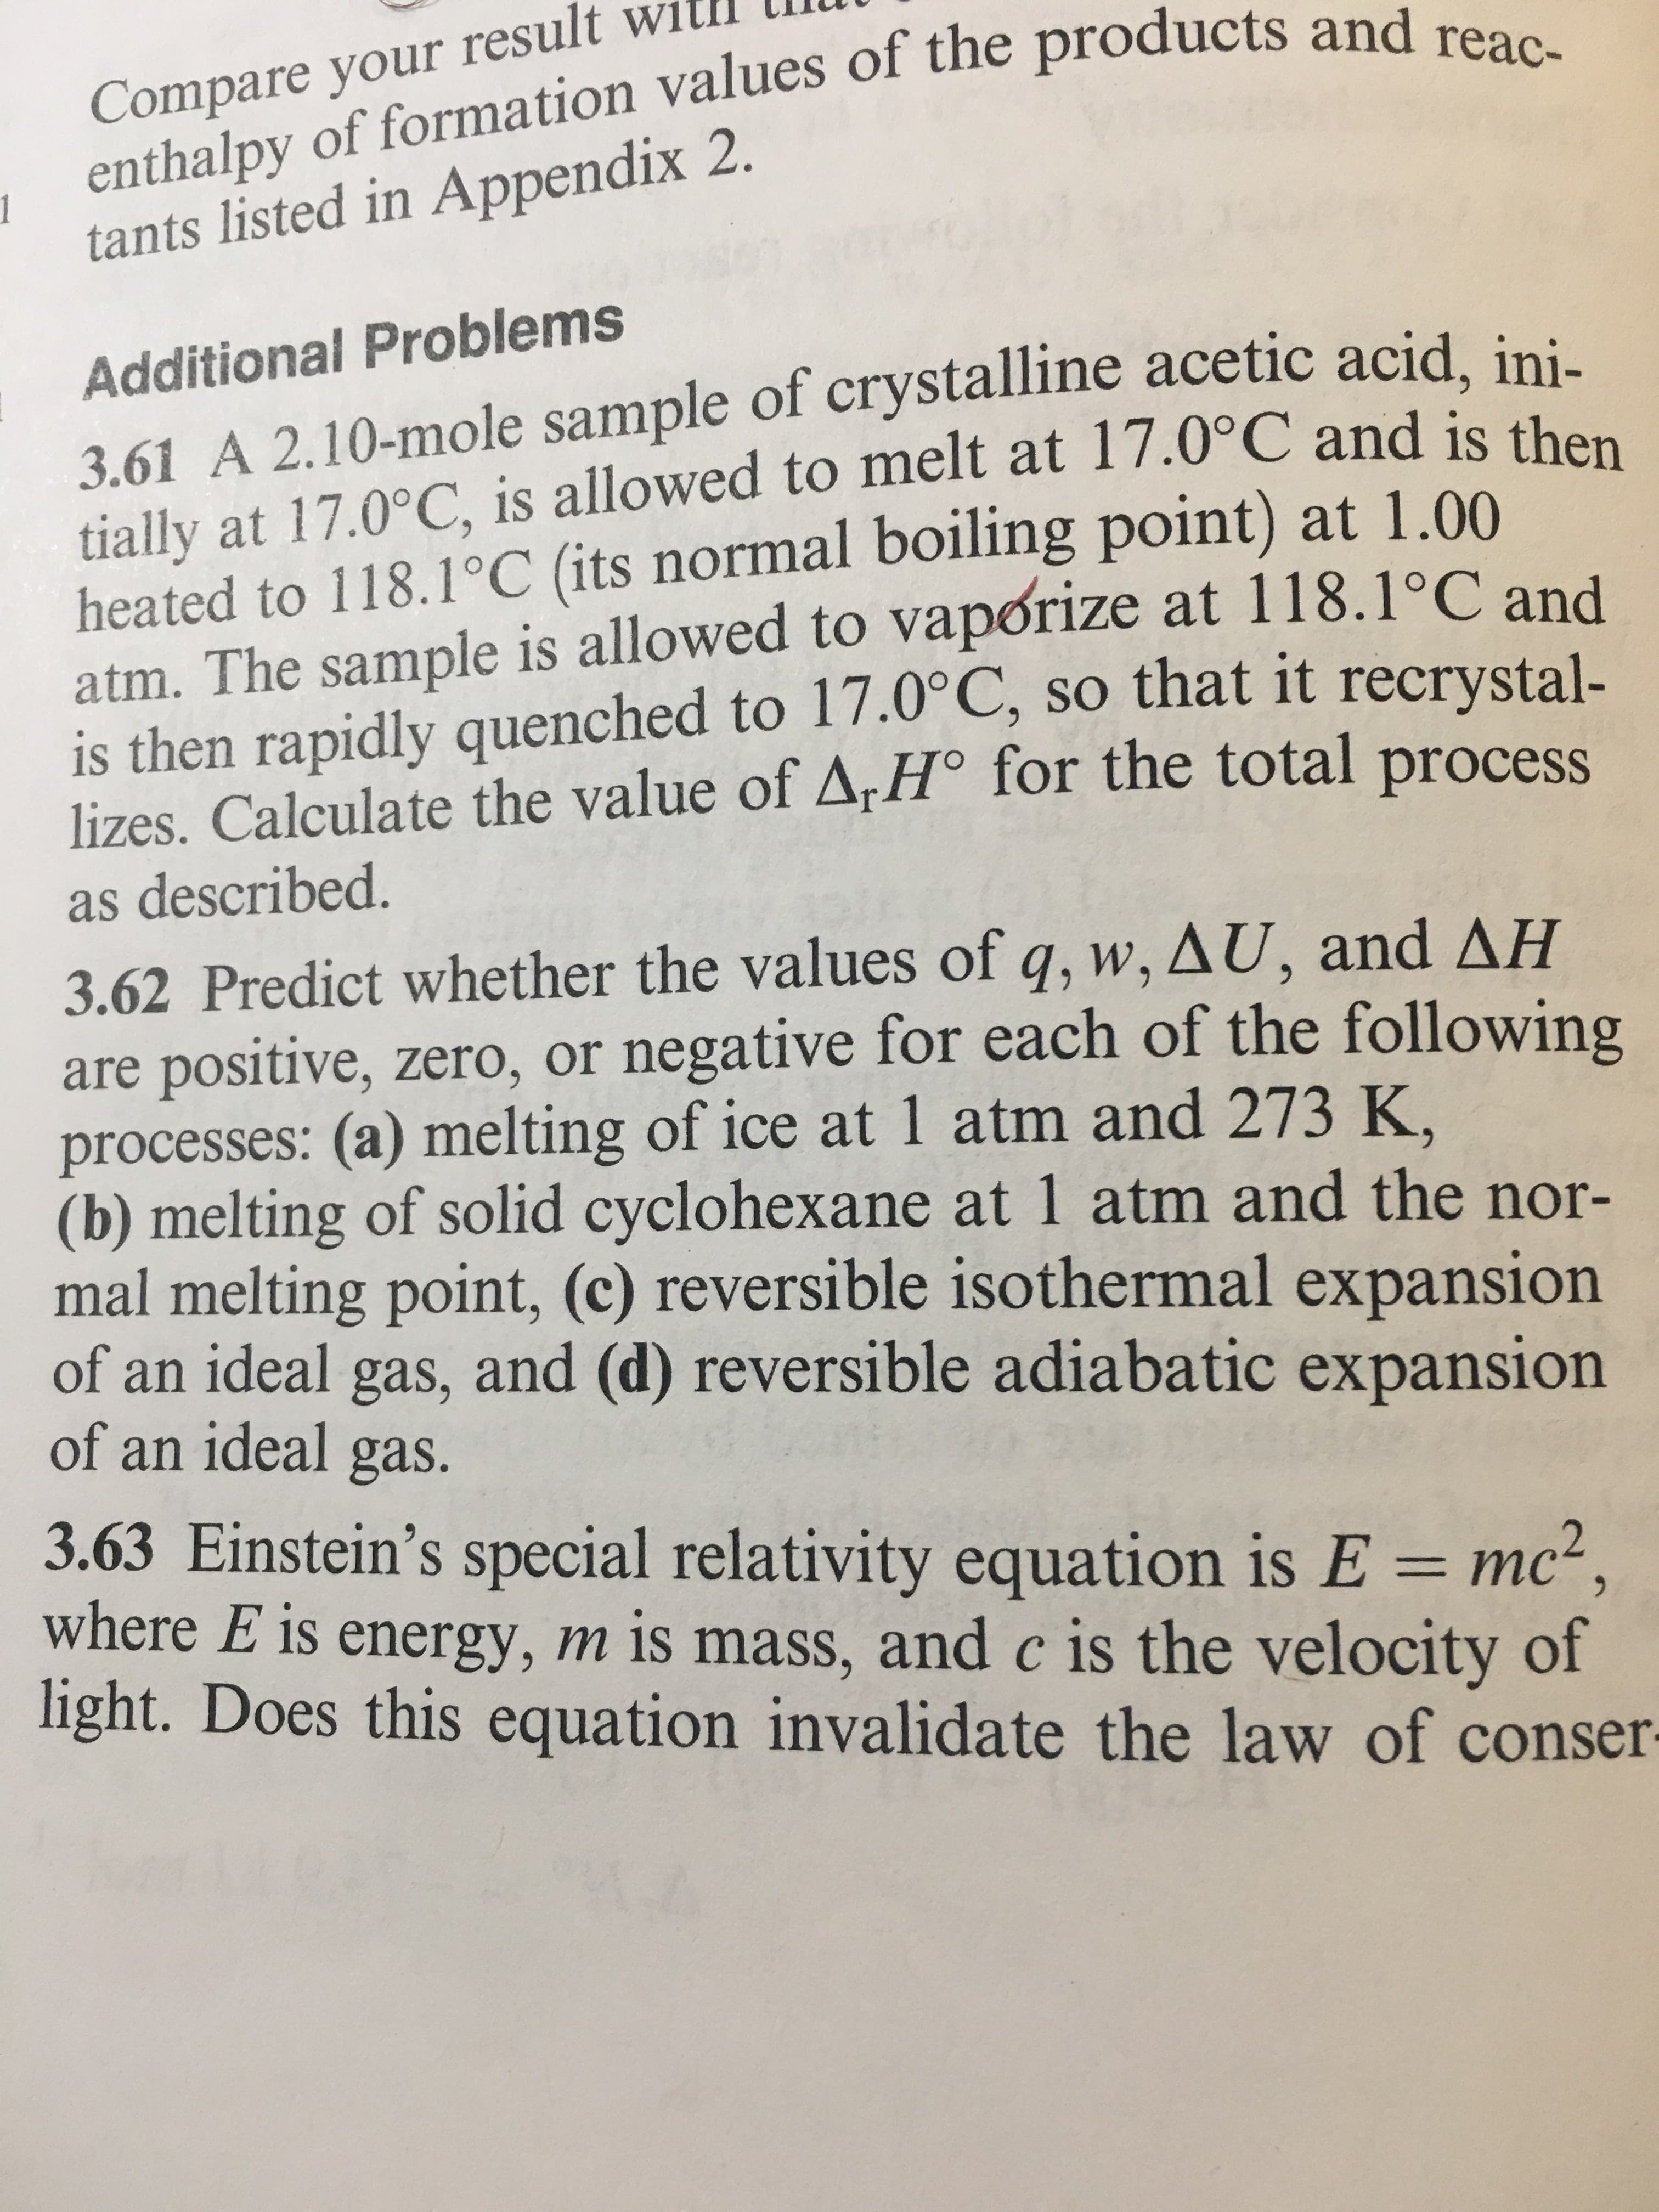 Compare your rese products and reac-
enthalpy of formation values of the
tants listed in Appendix 2.
1
Additional Problems
3.61 A 2.10-mole sample of crystalline acetic acid, ini
tially at 17.0°C, is allowed to melt at 17.0°C and is the
heated to 118.1°C (its normal boiling point) at 1.00
atm. The sample is allowed to vapórize at 118.1 C and
is then rapidly quenched to 17.0°C, so that it recrystal-
lizes. Calculate the value of ArHo for the total process
as described.
3.62 Predict whether the values of q,W,AU, and ΔΗ
are positive, zero, or negative for each of the following
processes: (a) melting of ice at 1 atm and 273 K,
(b) melting of solid cyclohexane at 1 atm and the nor-
mal melting point, (c) reversible isothermal expansion
of an ideal gas, and (d) reversible adiabatic expansion
of an ideal gas.
3.63 Einstein's special relativity equation is E mc2
where E is energy, m is mass, and c is the velocity of
light. Does this equation invalidate the law of conser
